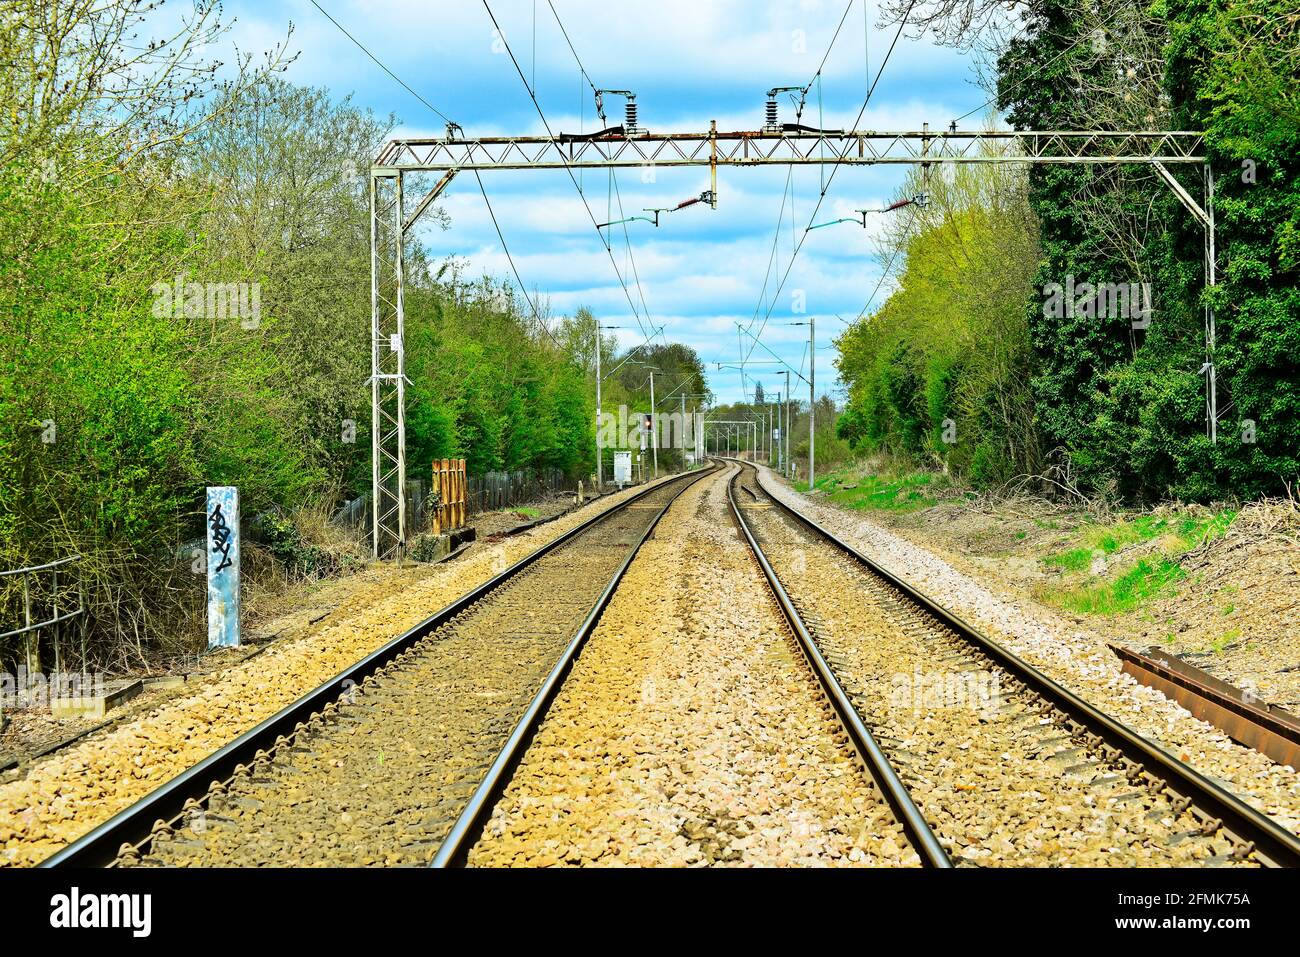 Railway track with cloudy sky in the background Stock Photo